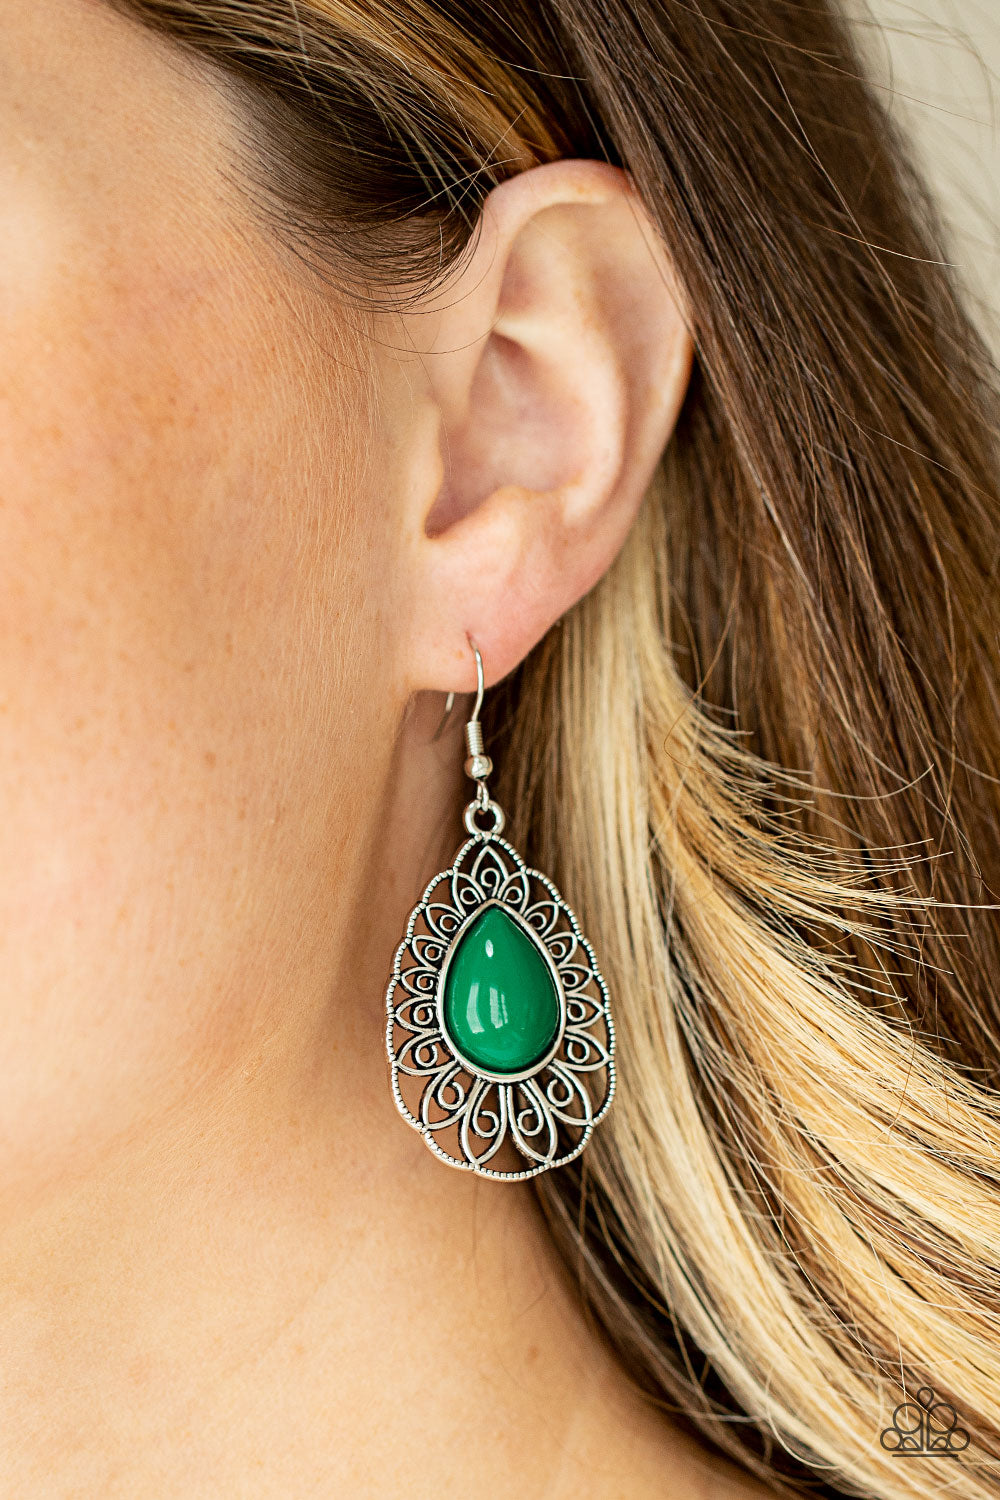 Dream STAYCATION Green Earring - Paparazzi Accessories A shiny Mint teardrop bead is pressed into the center of an airy silver teardrop frame radiating with ornate petals for a whimsical finesse. Earring attaches to a standard fishhook fitting.  All Paparazzi Accessories are lead free and nickel free!  Sold as one pair of earrings.